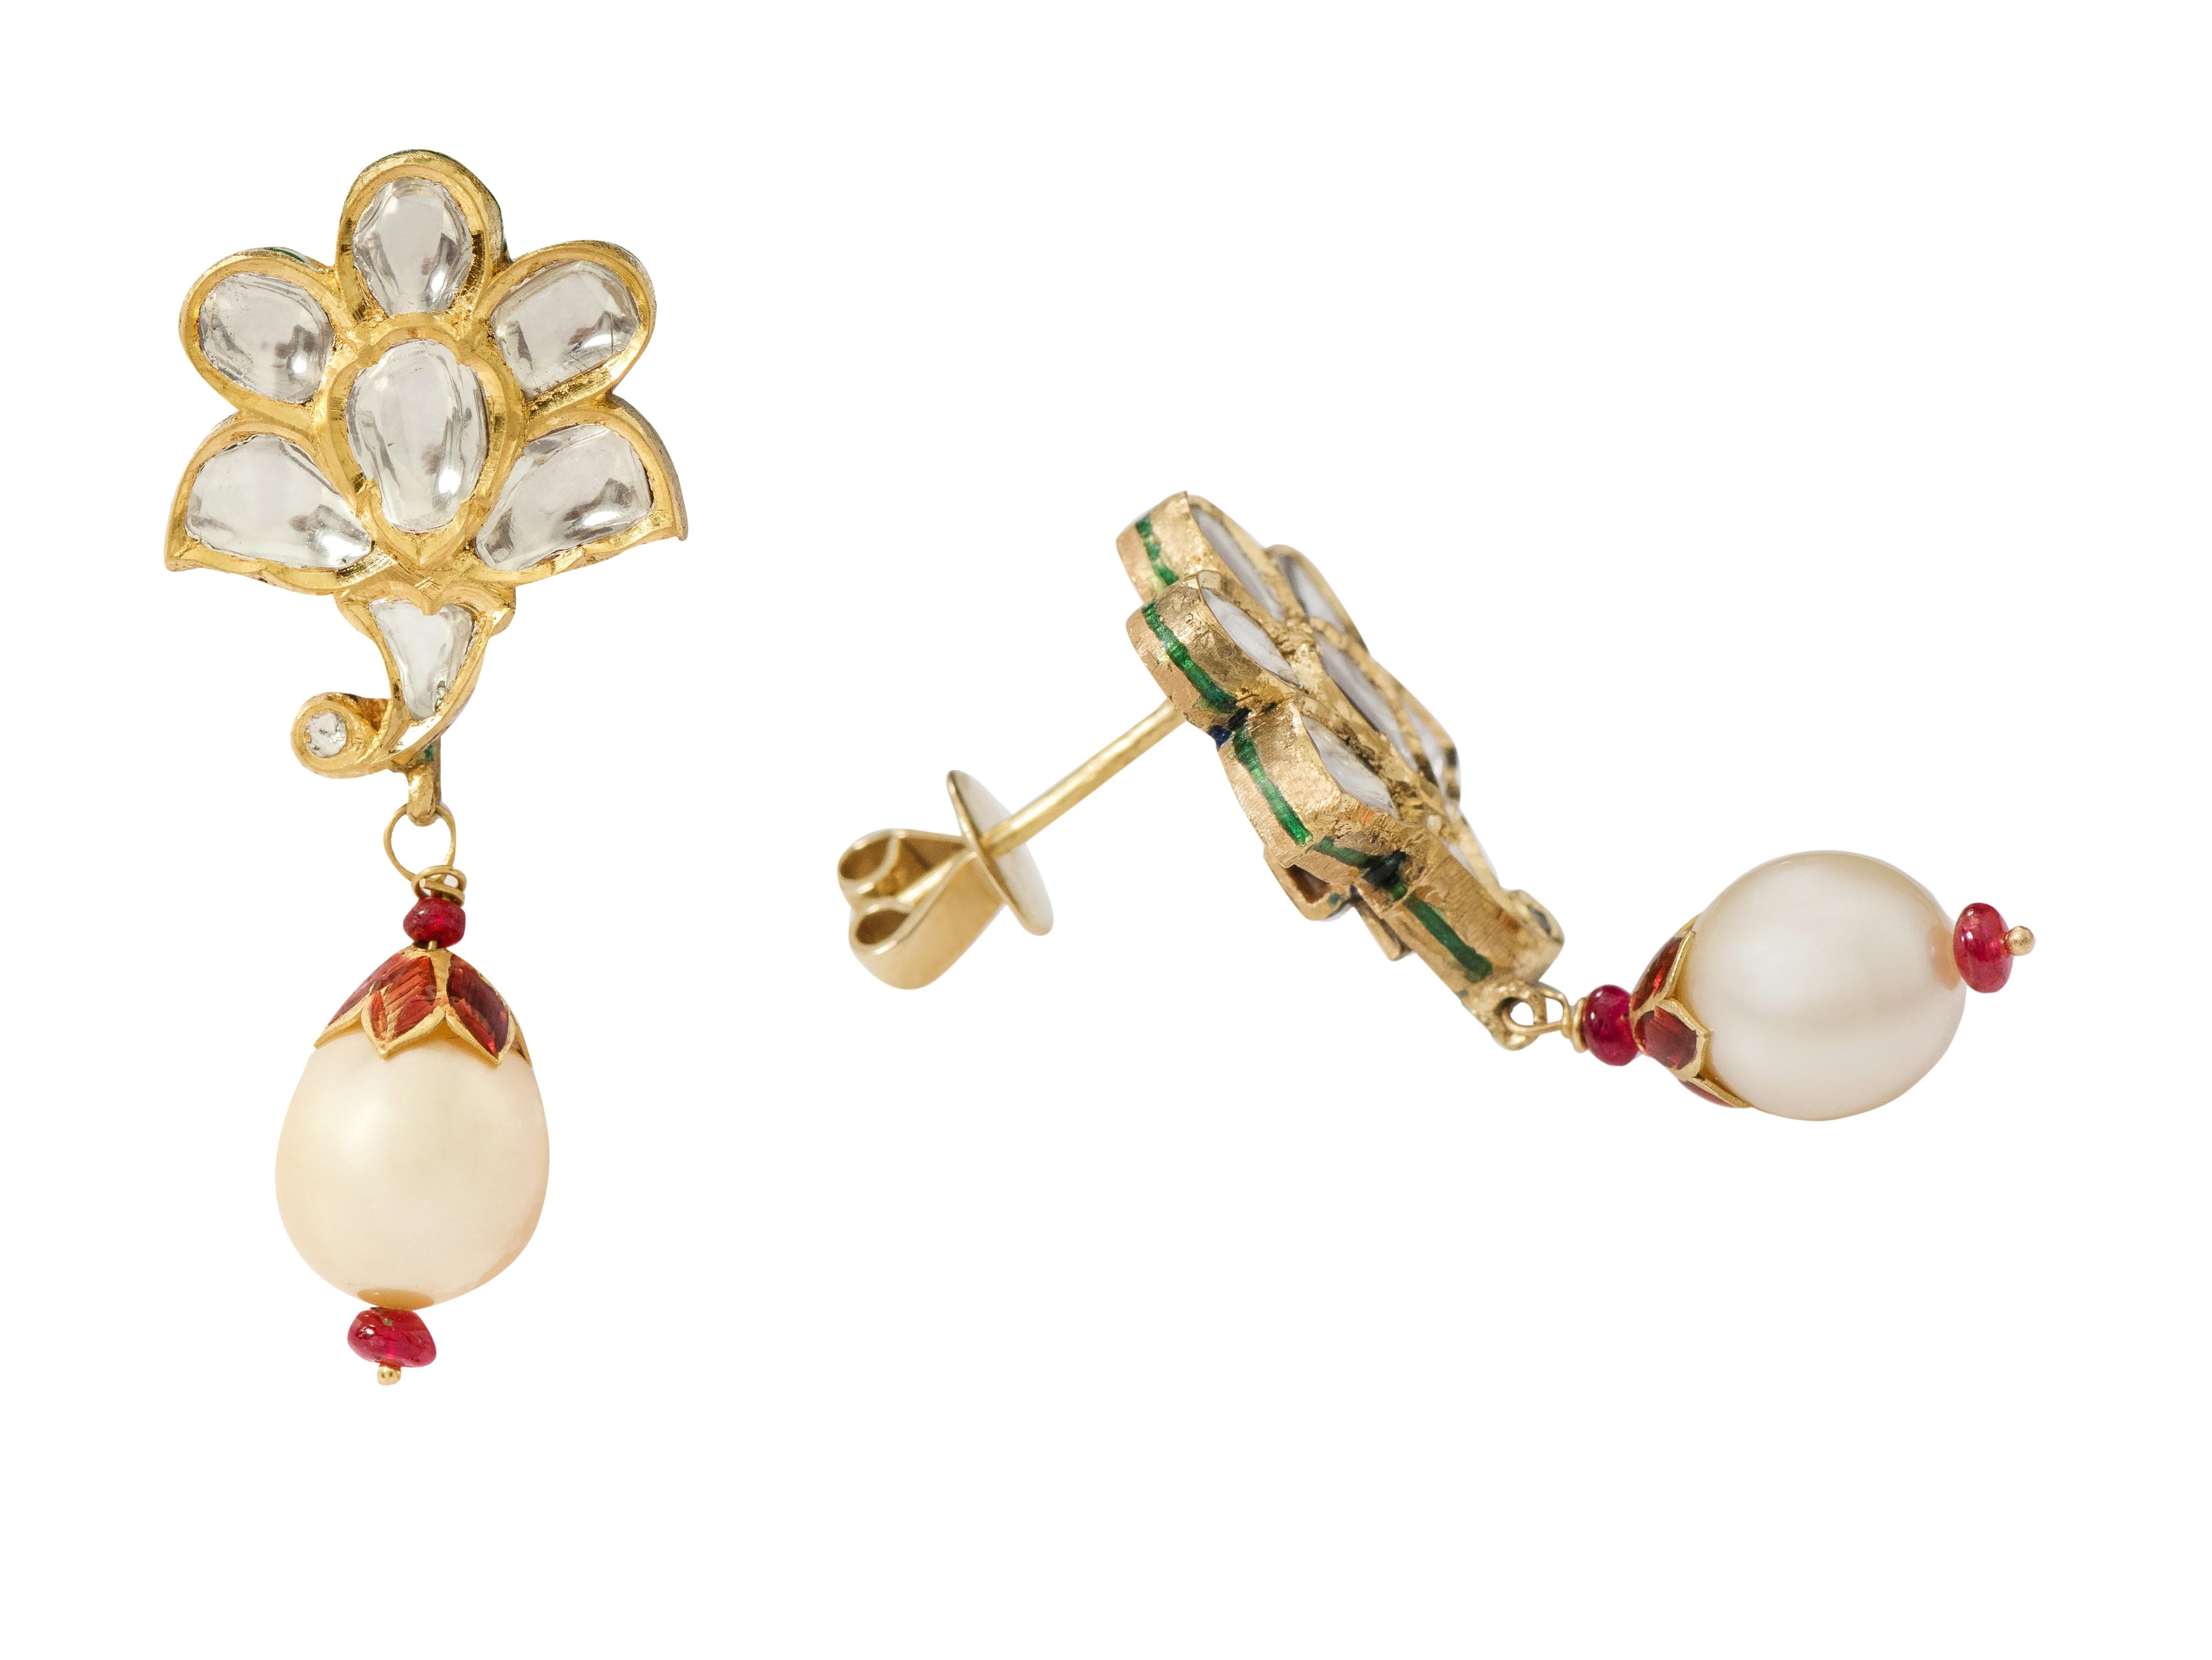 22 Karat Gold Diamond and Pearl Drop Earring Handcrafted with Multi-Color Enamel Work

This mesmerizing Mughal era hand-made polki diamond and pearl long earring is exquisite. The top part of the earring is formed of perfectly cut special shape flat